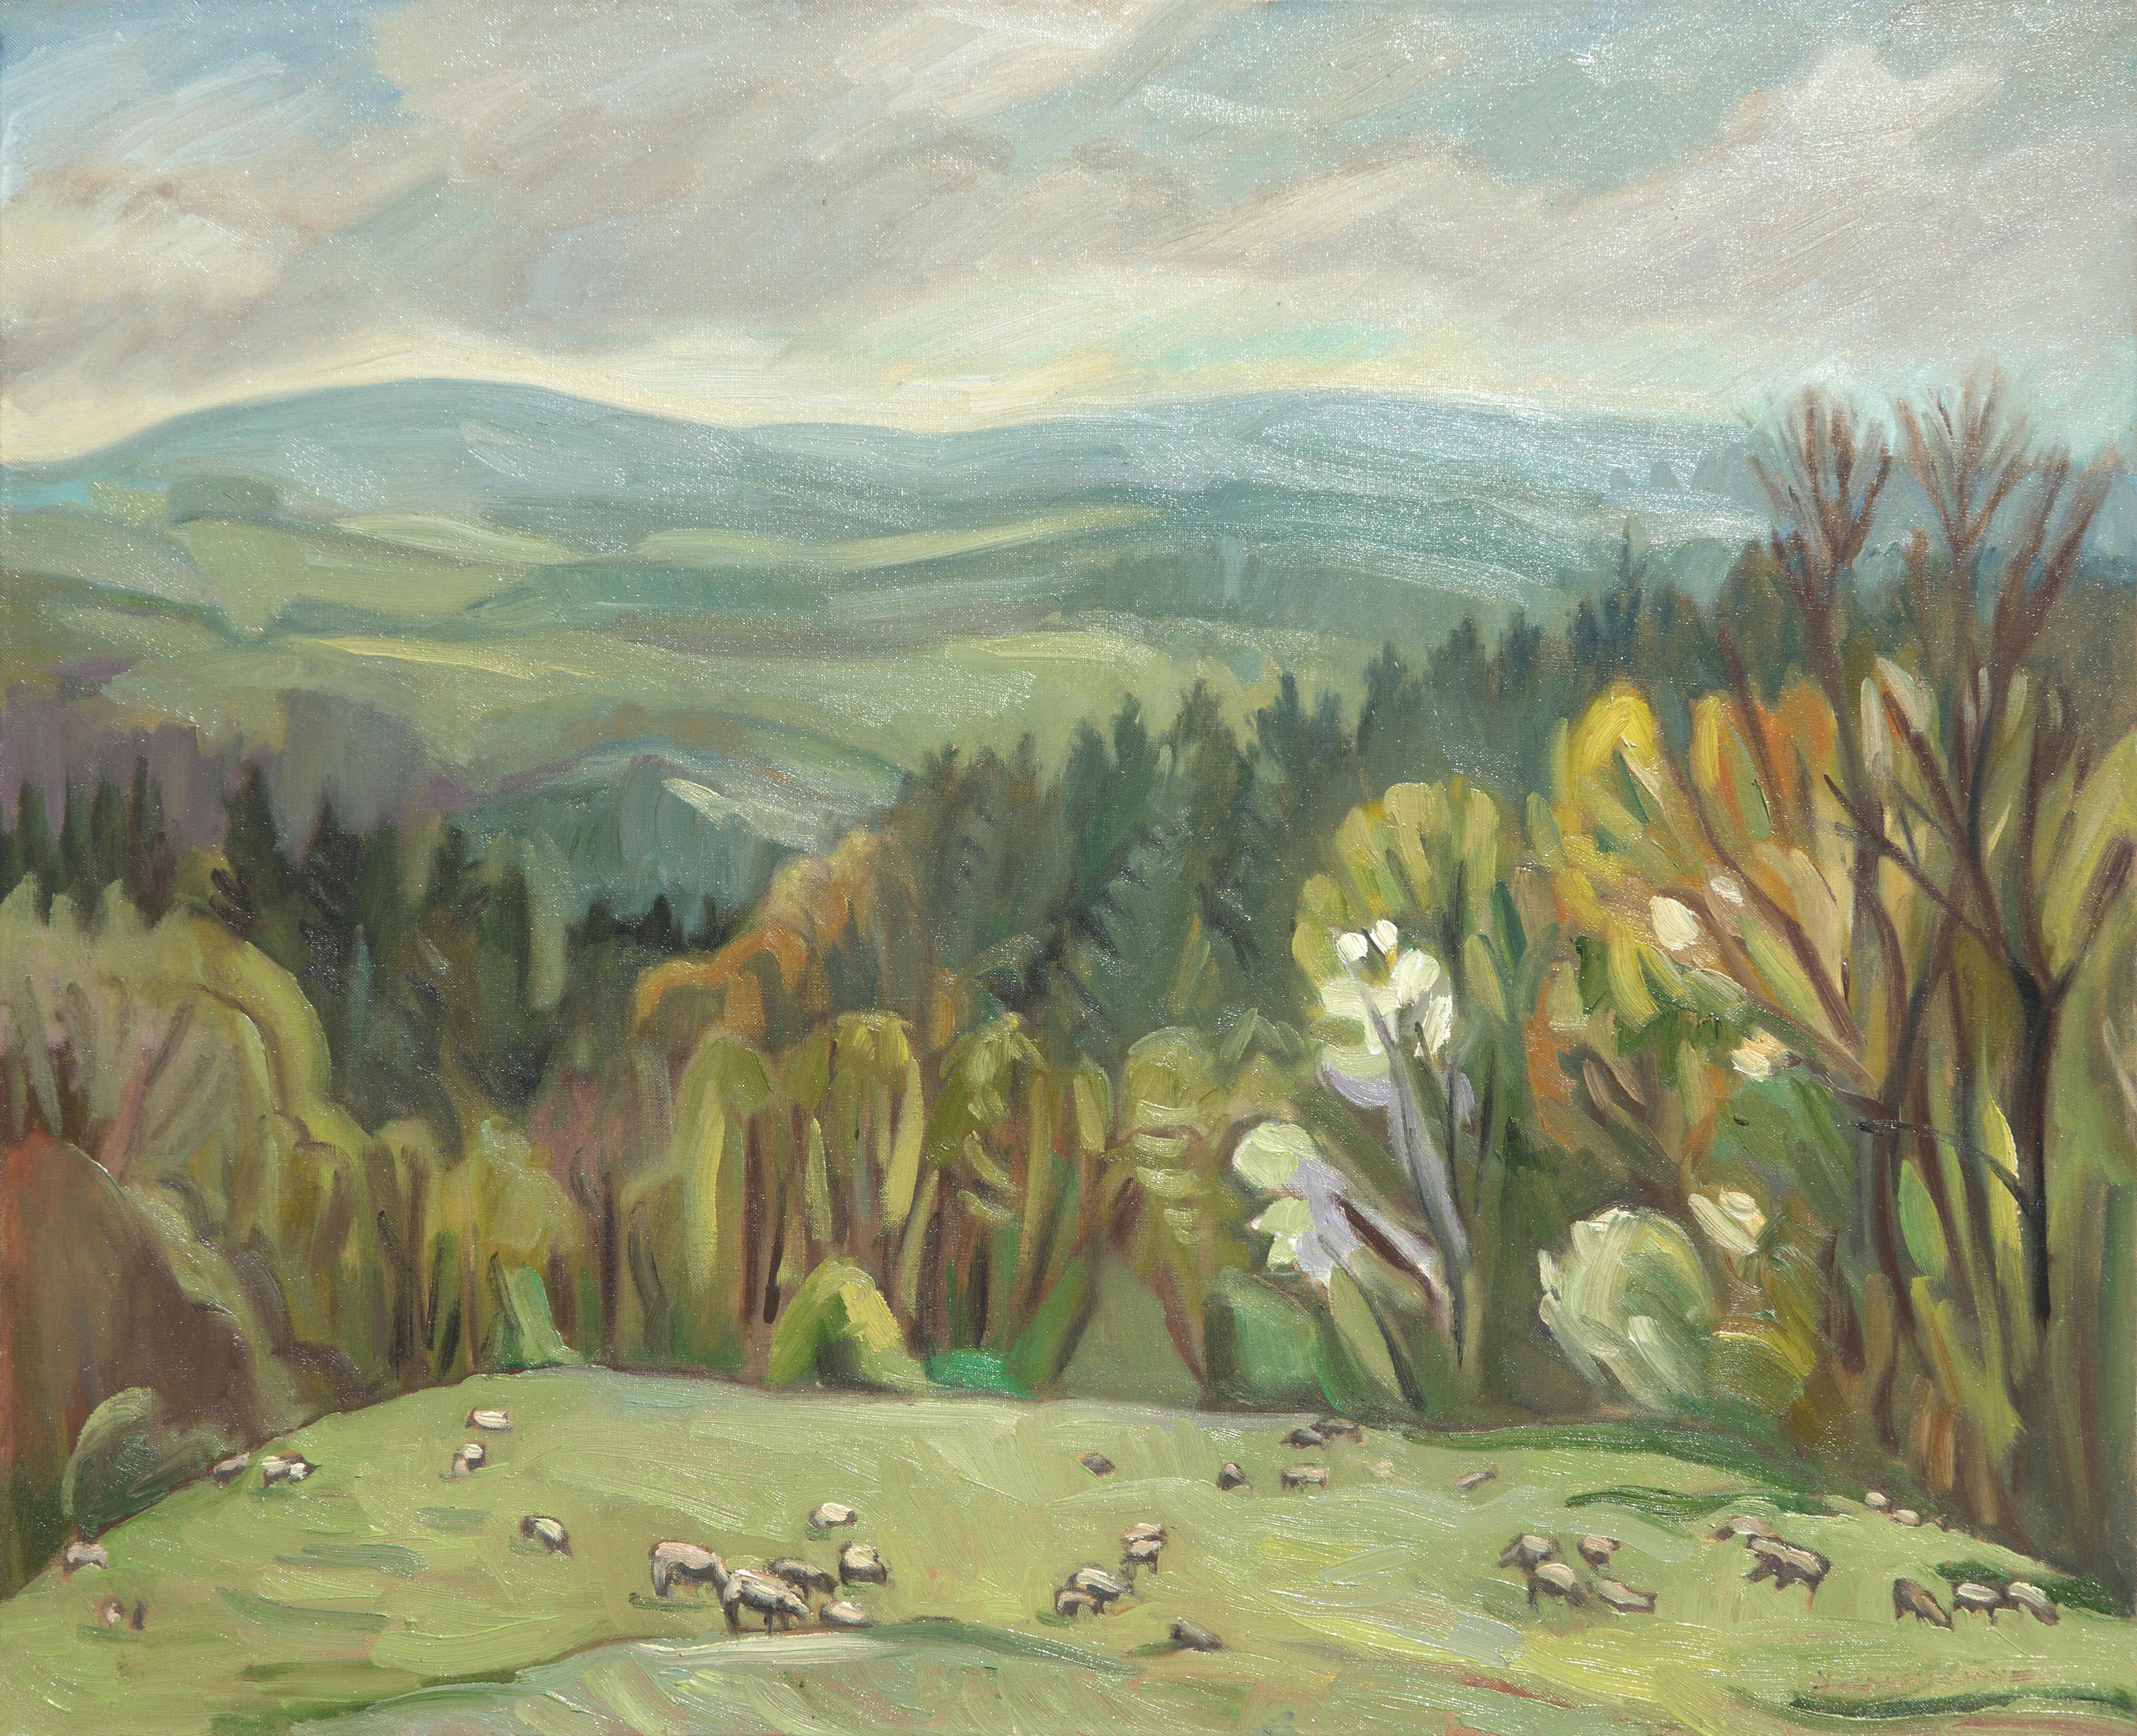 Yves Calméjane Landscape Painting – "The Sheeps", Graze, Forest and Hills Green Impressionist Landscape Oil Painting